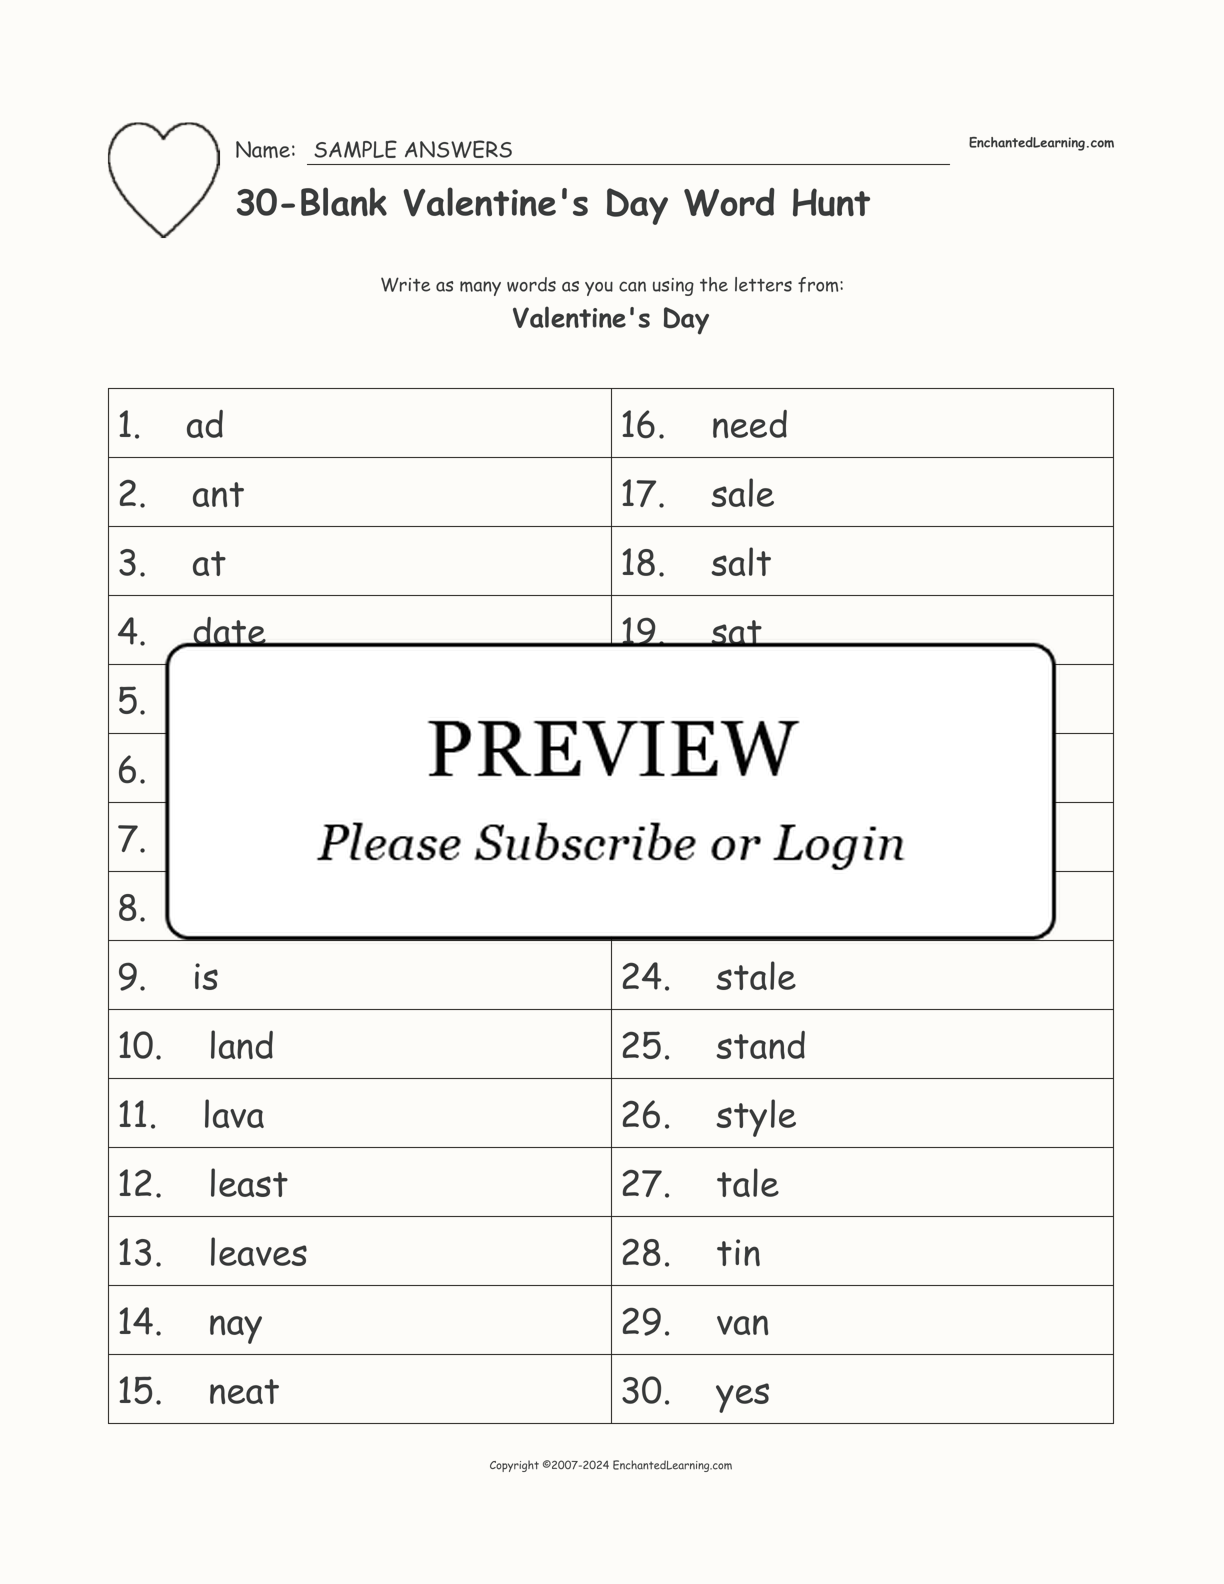 30-Blank Valentine's Day Word Hunt interactive worksheet page 2